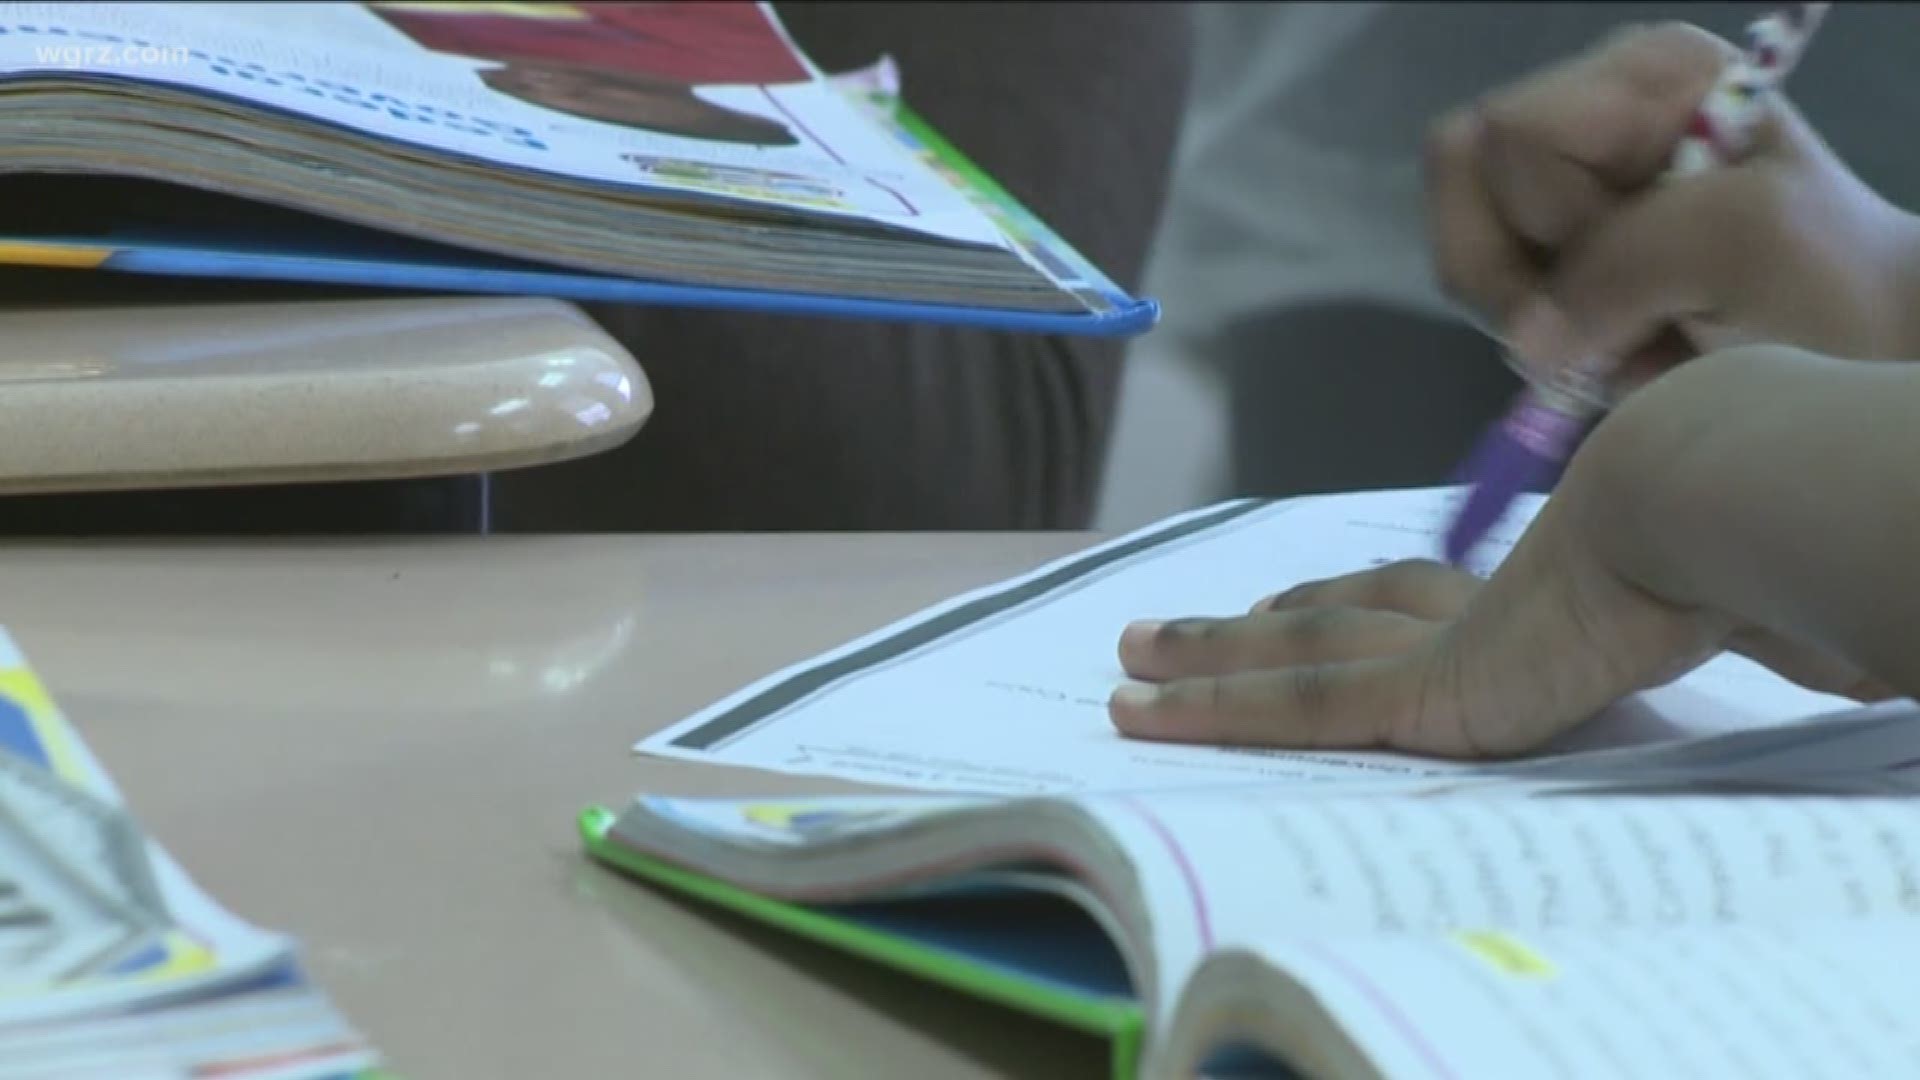 Mental Health classes added to NY curriculum